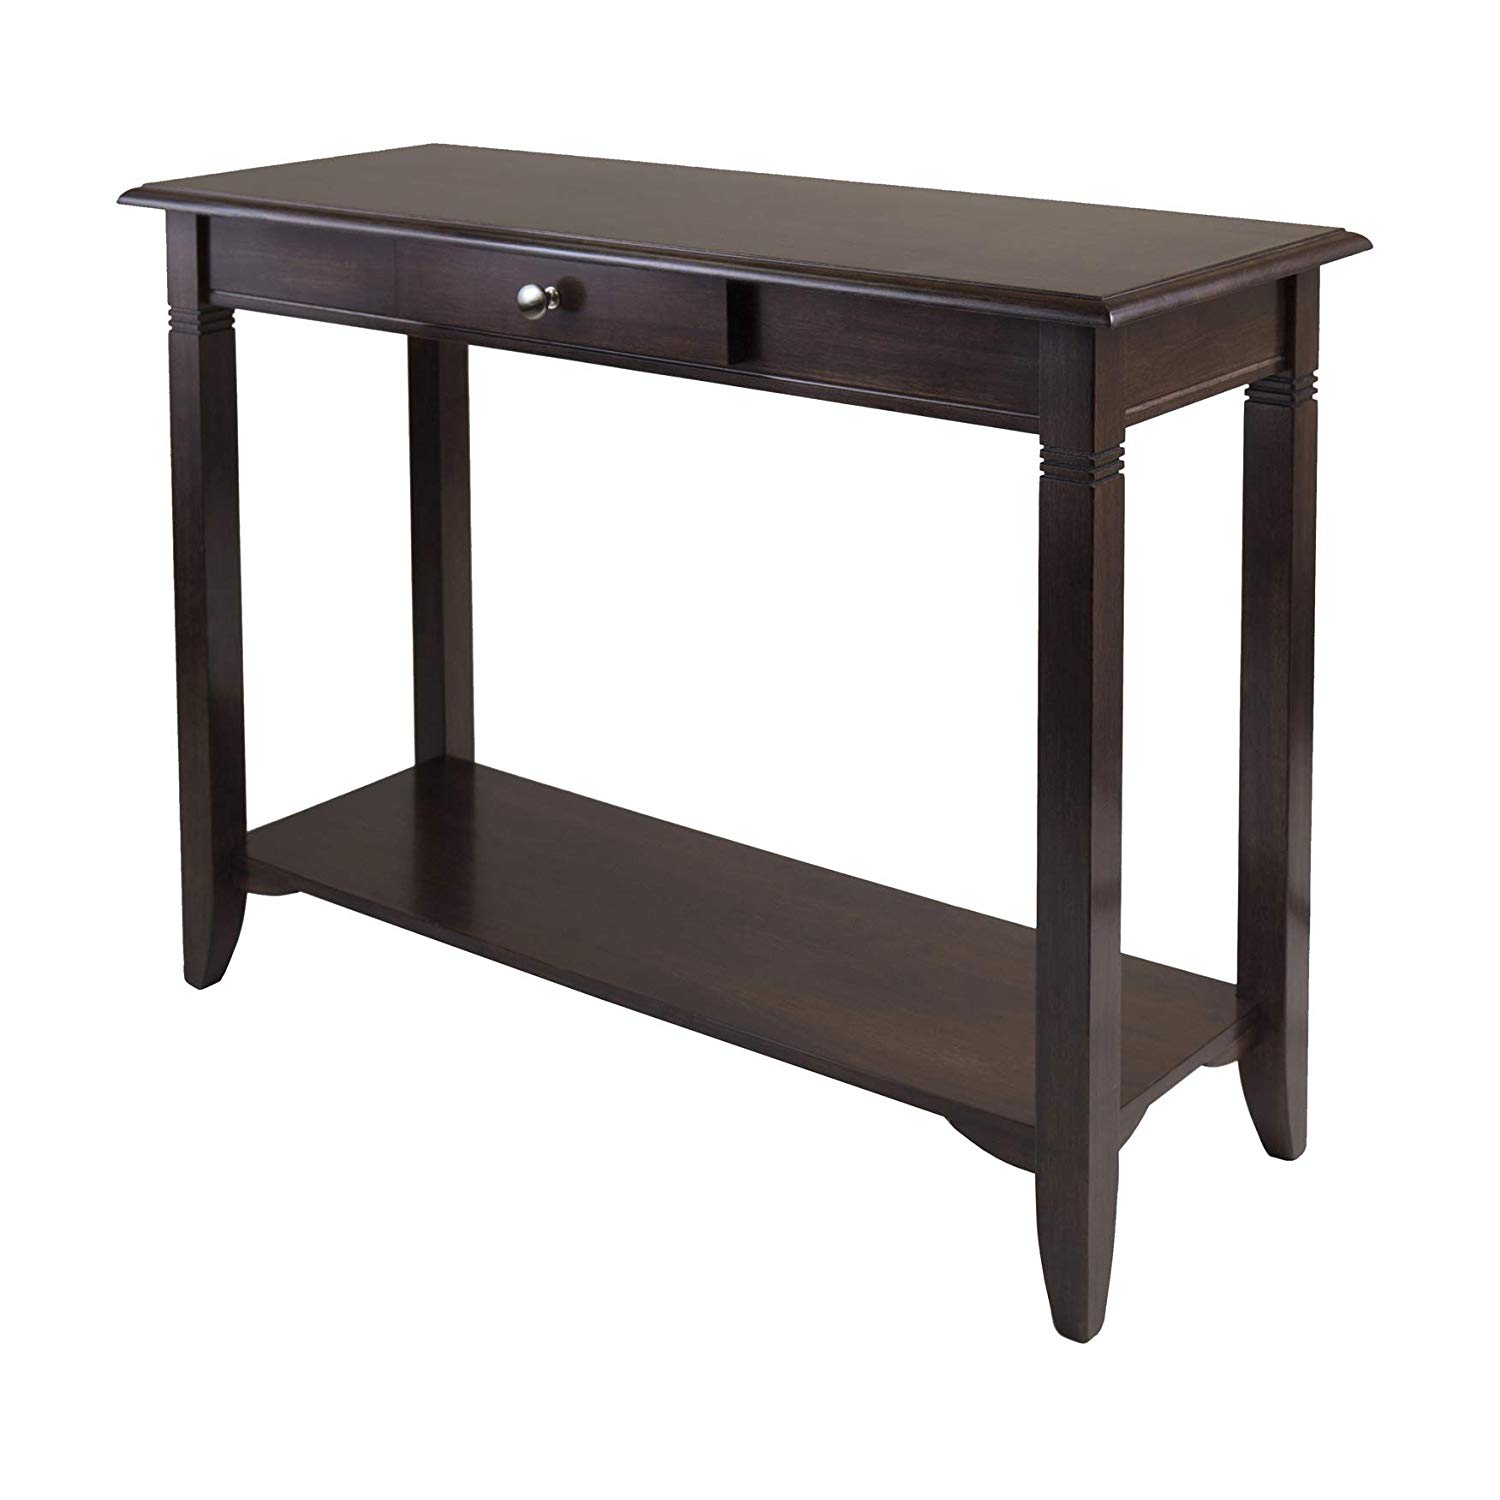 winsome nolan console table with drawer kitchen dining outdoor accent storage nautical style chandeliers glass center cool nightstand lamps small round cocktail black and white